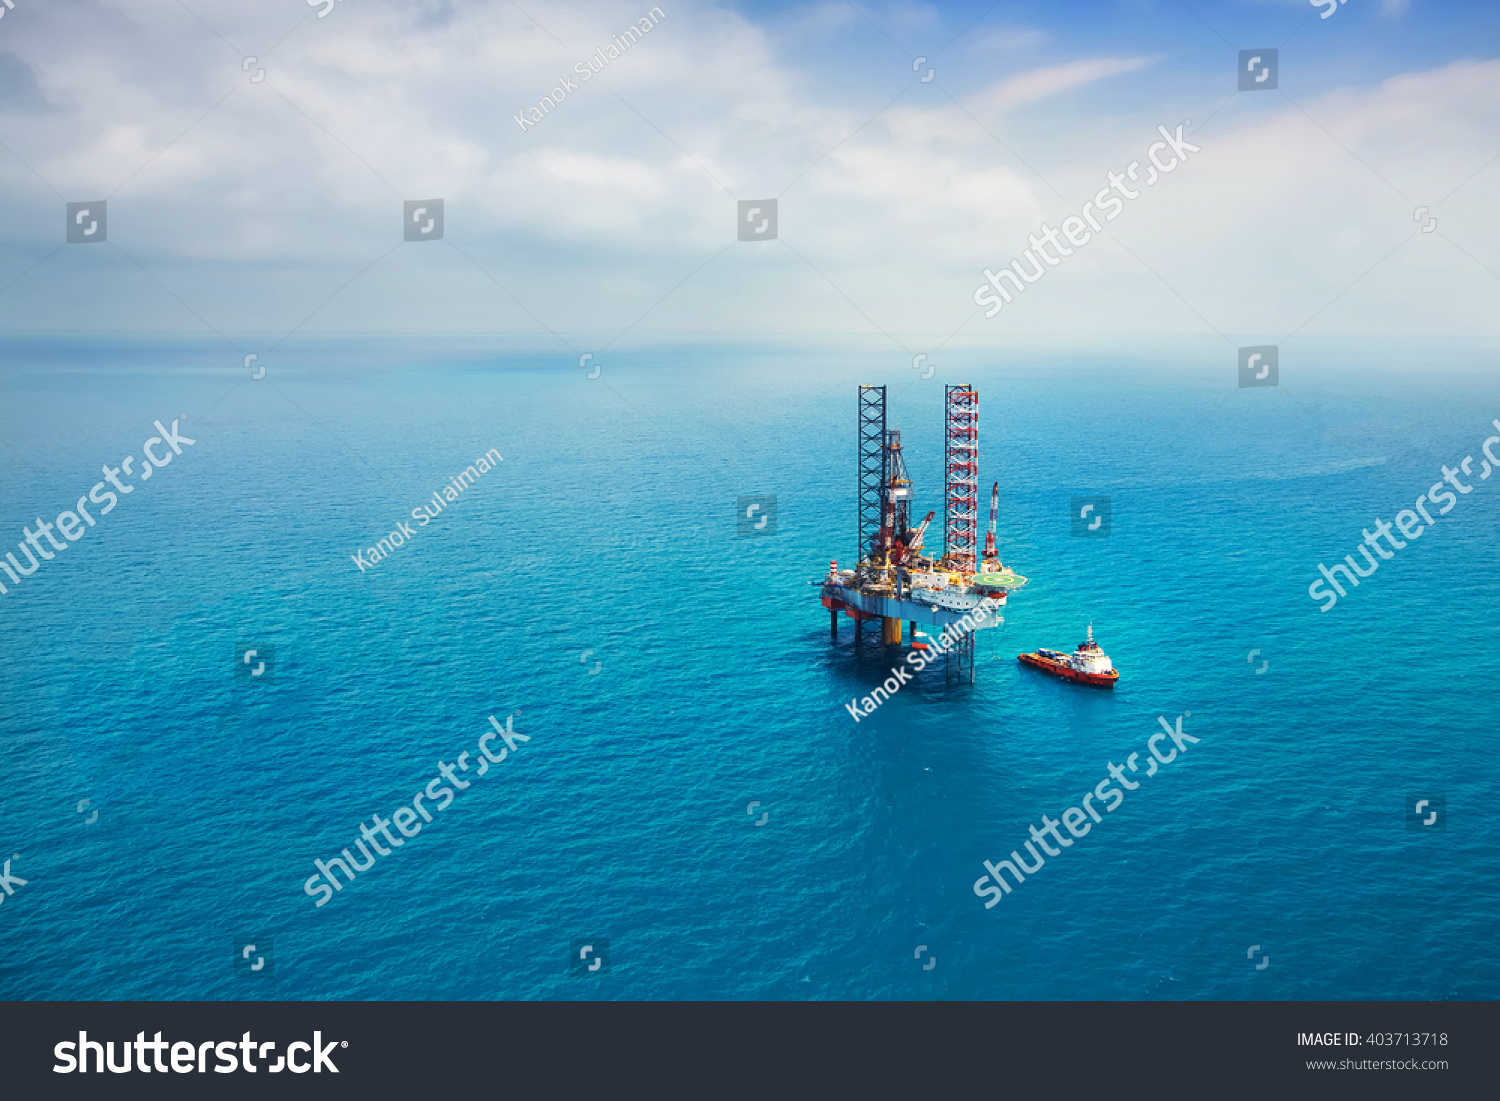 Oil rig in the gulf with copy space #403713718